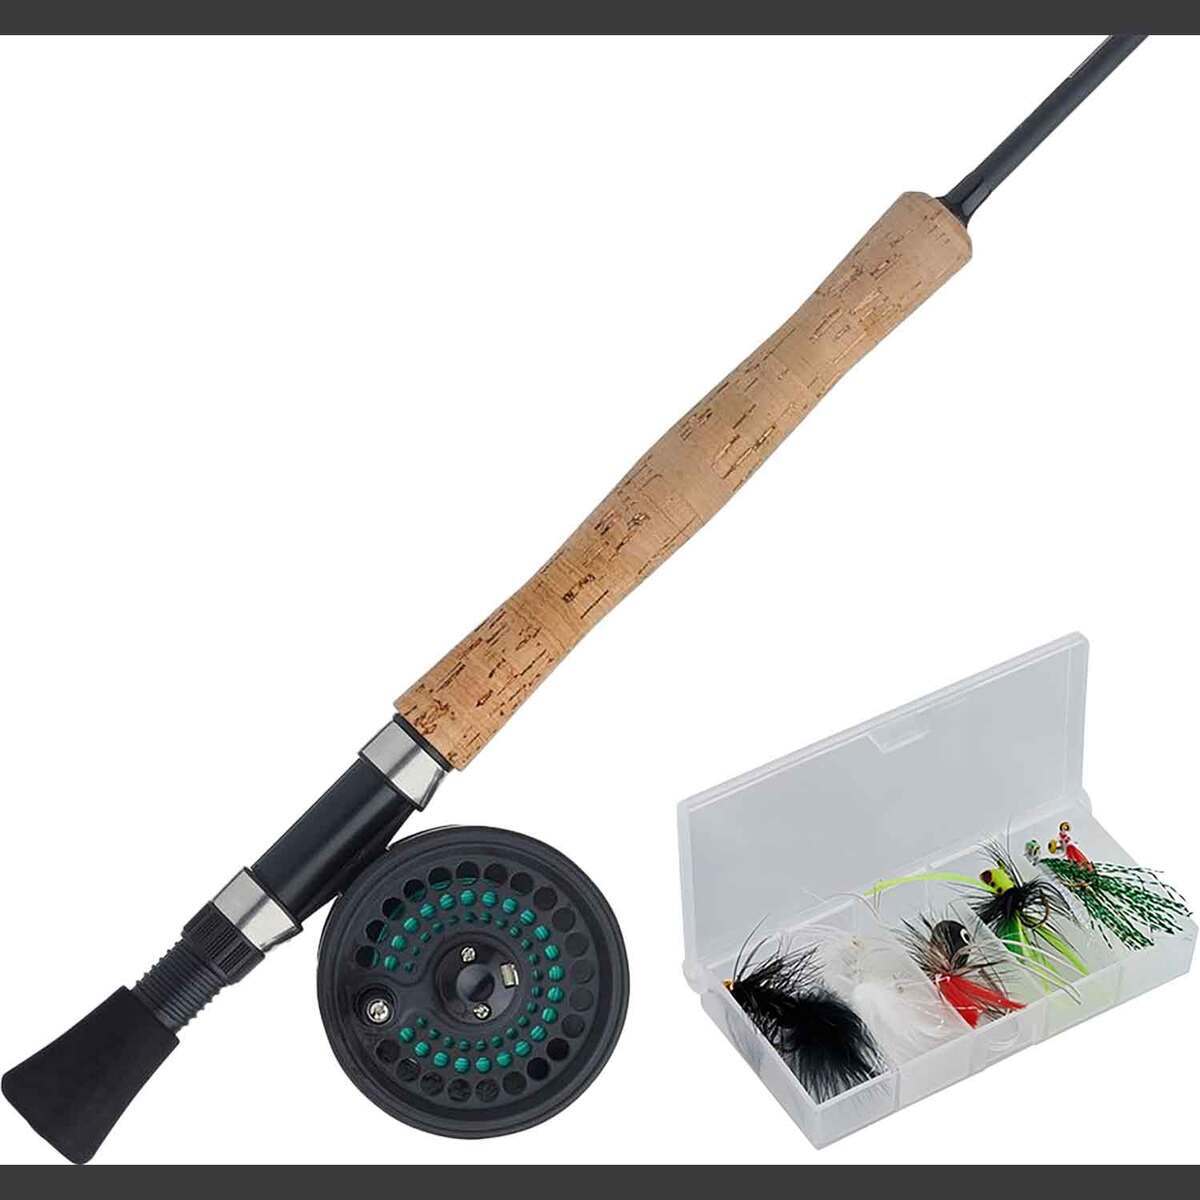 shakespeare saltwater fishing rod and tackle box kit